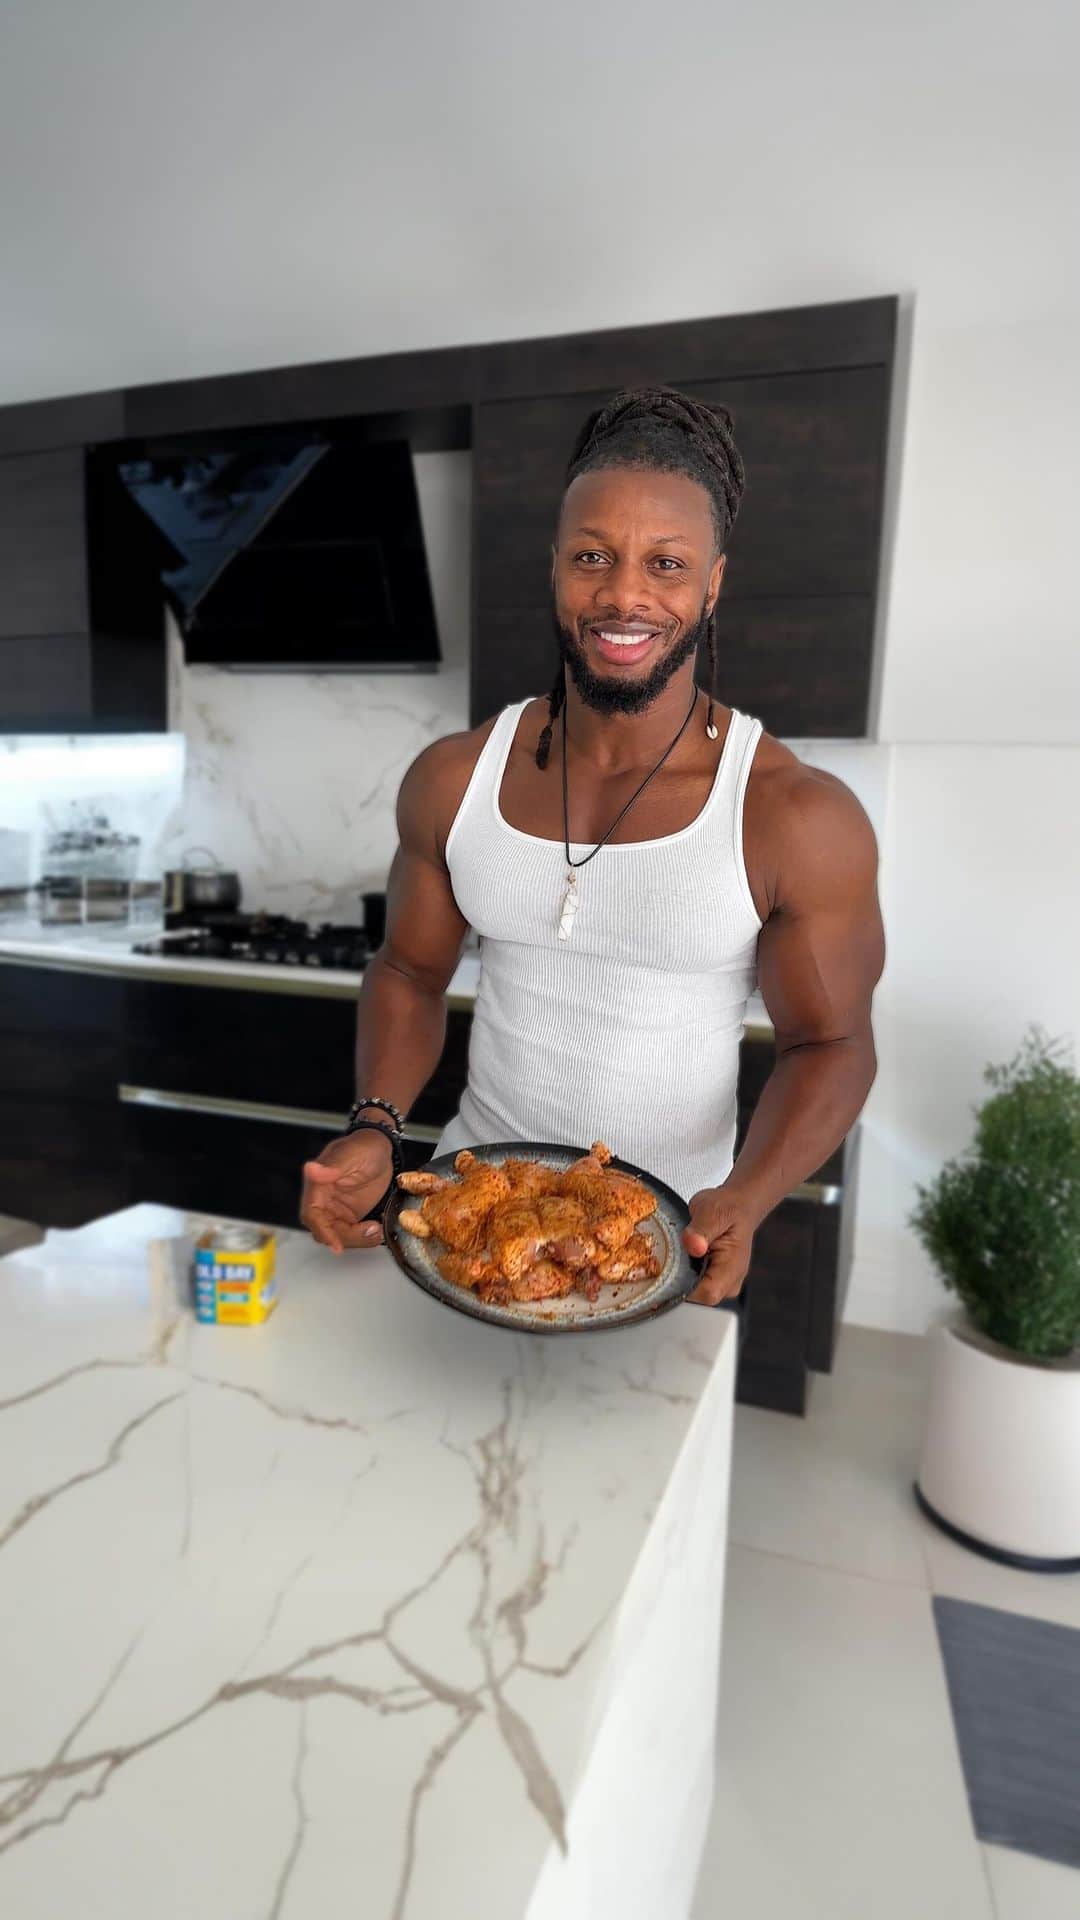 Ulissesworldのインスタグラム：「Food doesn’t have to be boring when you’re trying to achieve your goals! 🏋️‍♂️🍽️   Join me in the kitchen for a delicious muscle-building recipe, here’s what you’ll need:  ✅ 1/2 chicken ✅ 1 Boiled Egg ✅ 1 Handful Crunchy Salad ✅ 125g Rice  For more recipies like this catered to your dietary requirements check out the link in my bio for your own ultimate transformation program with custom meal plans & workout plans based on your goals and lifestyle 💪🏾」